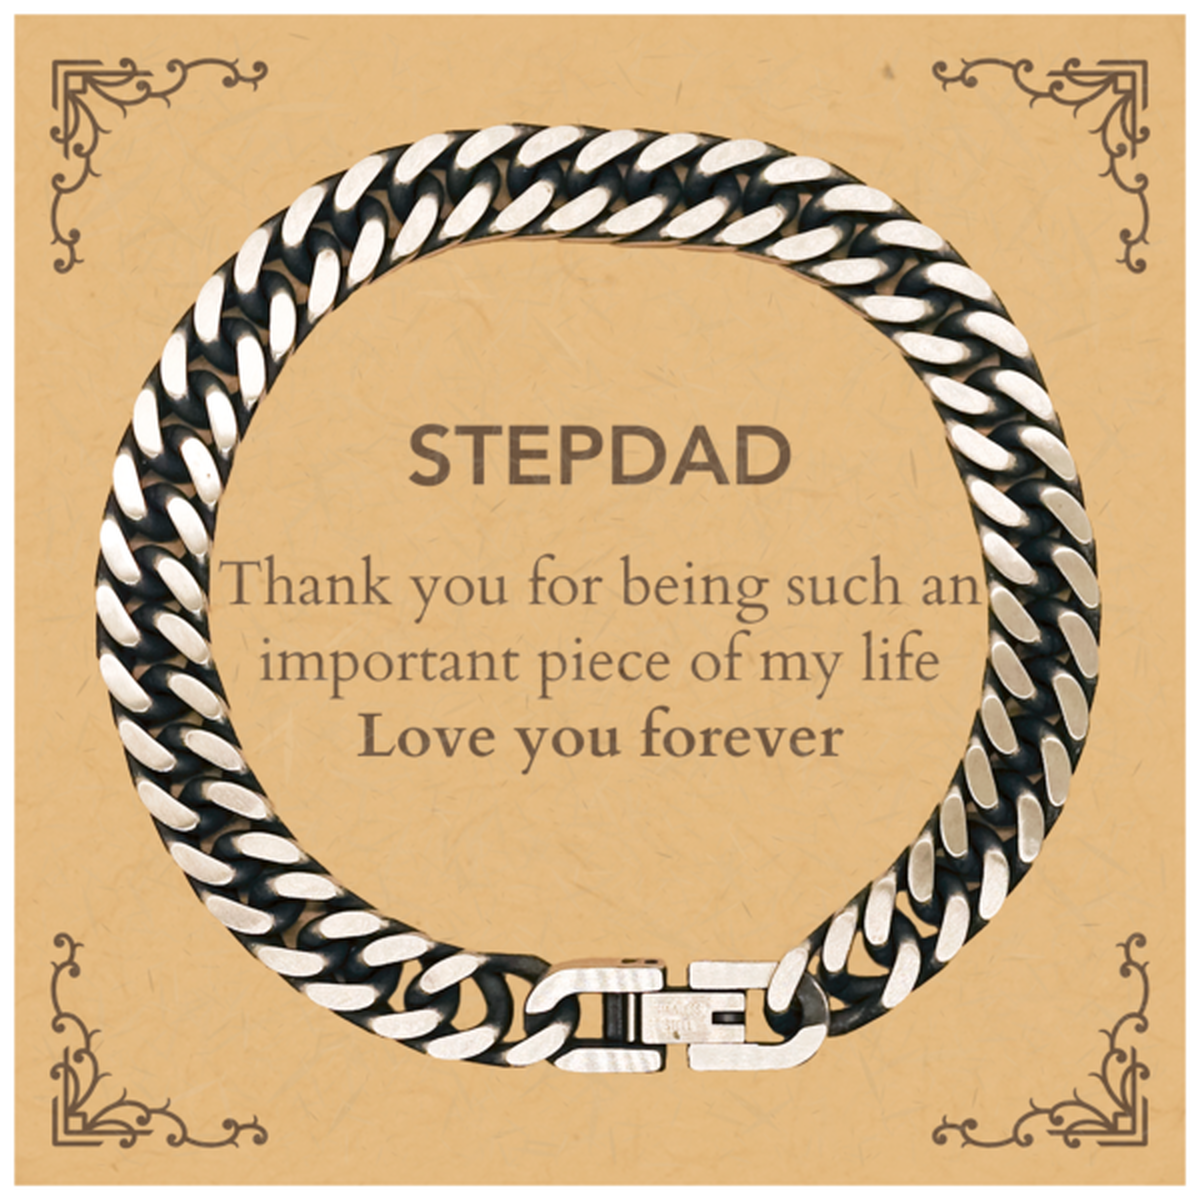 Appropriate Stepdad Cuban Link Chain Bracelet Epic Birthday Gifts for Stepdad Thank you for being such an important piece of my life Stepdad Christmas Mothers Fathers Day